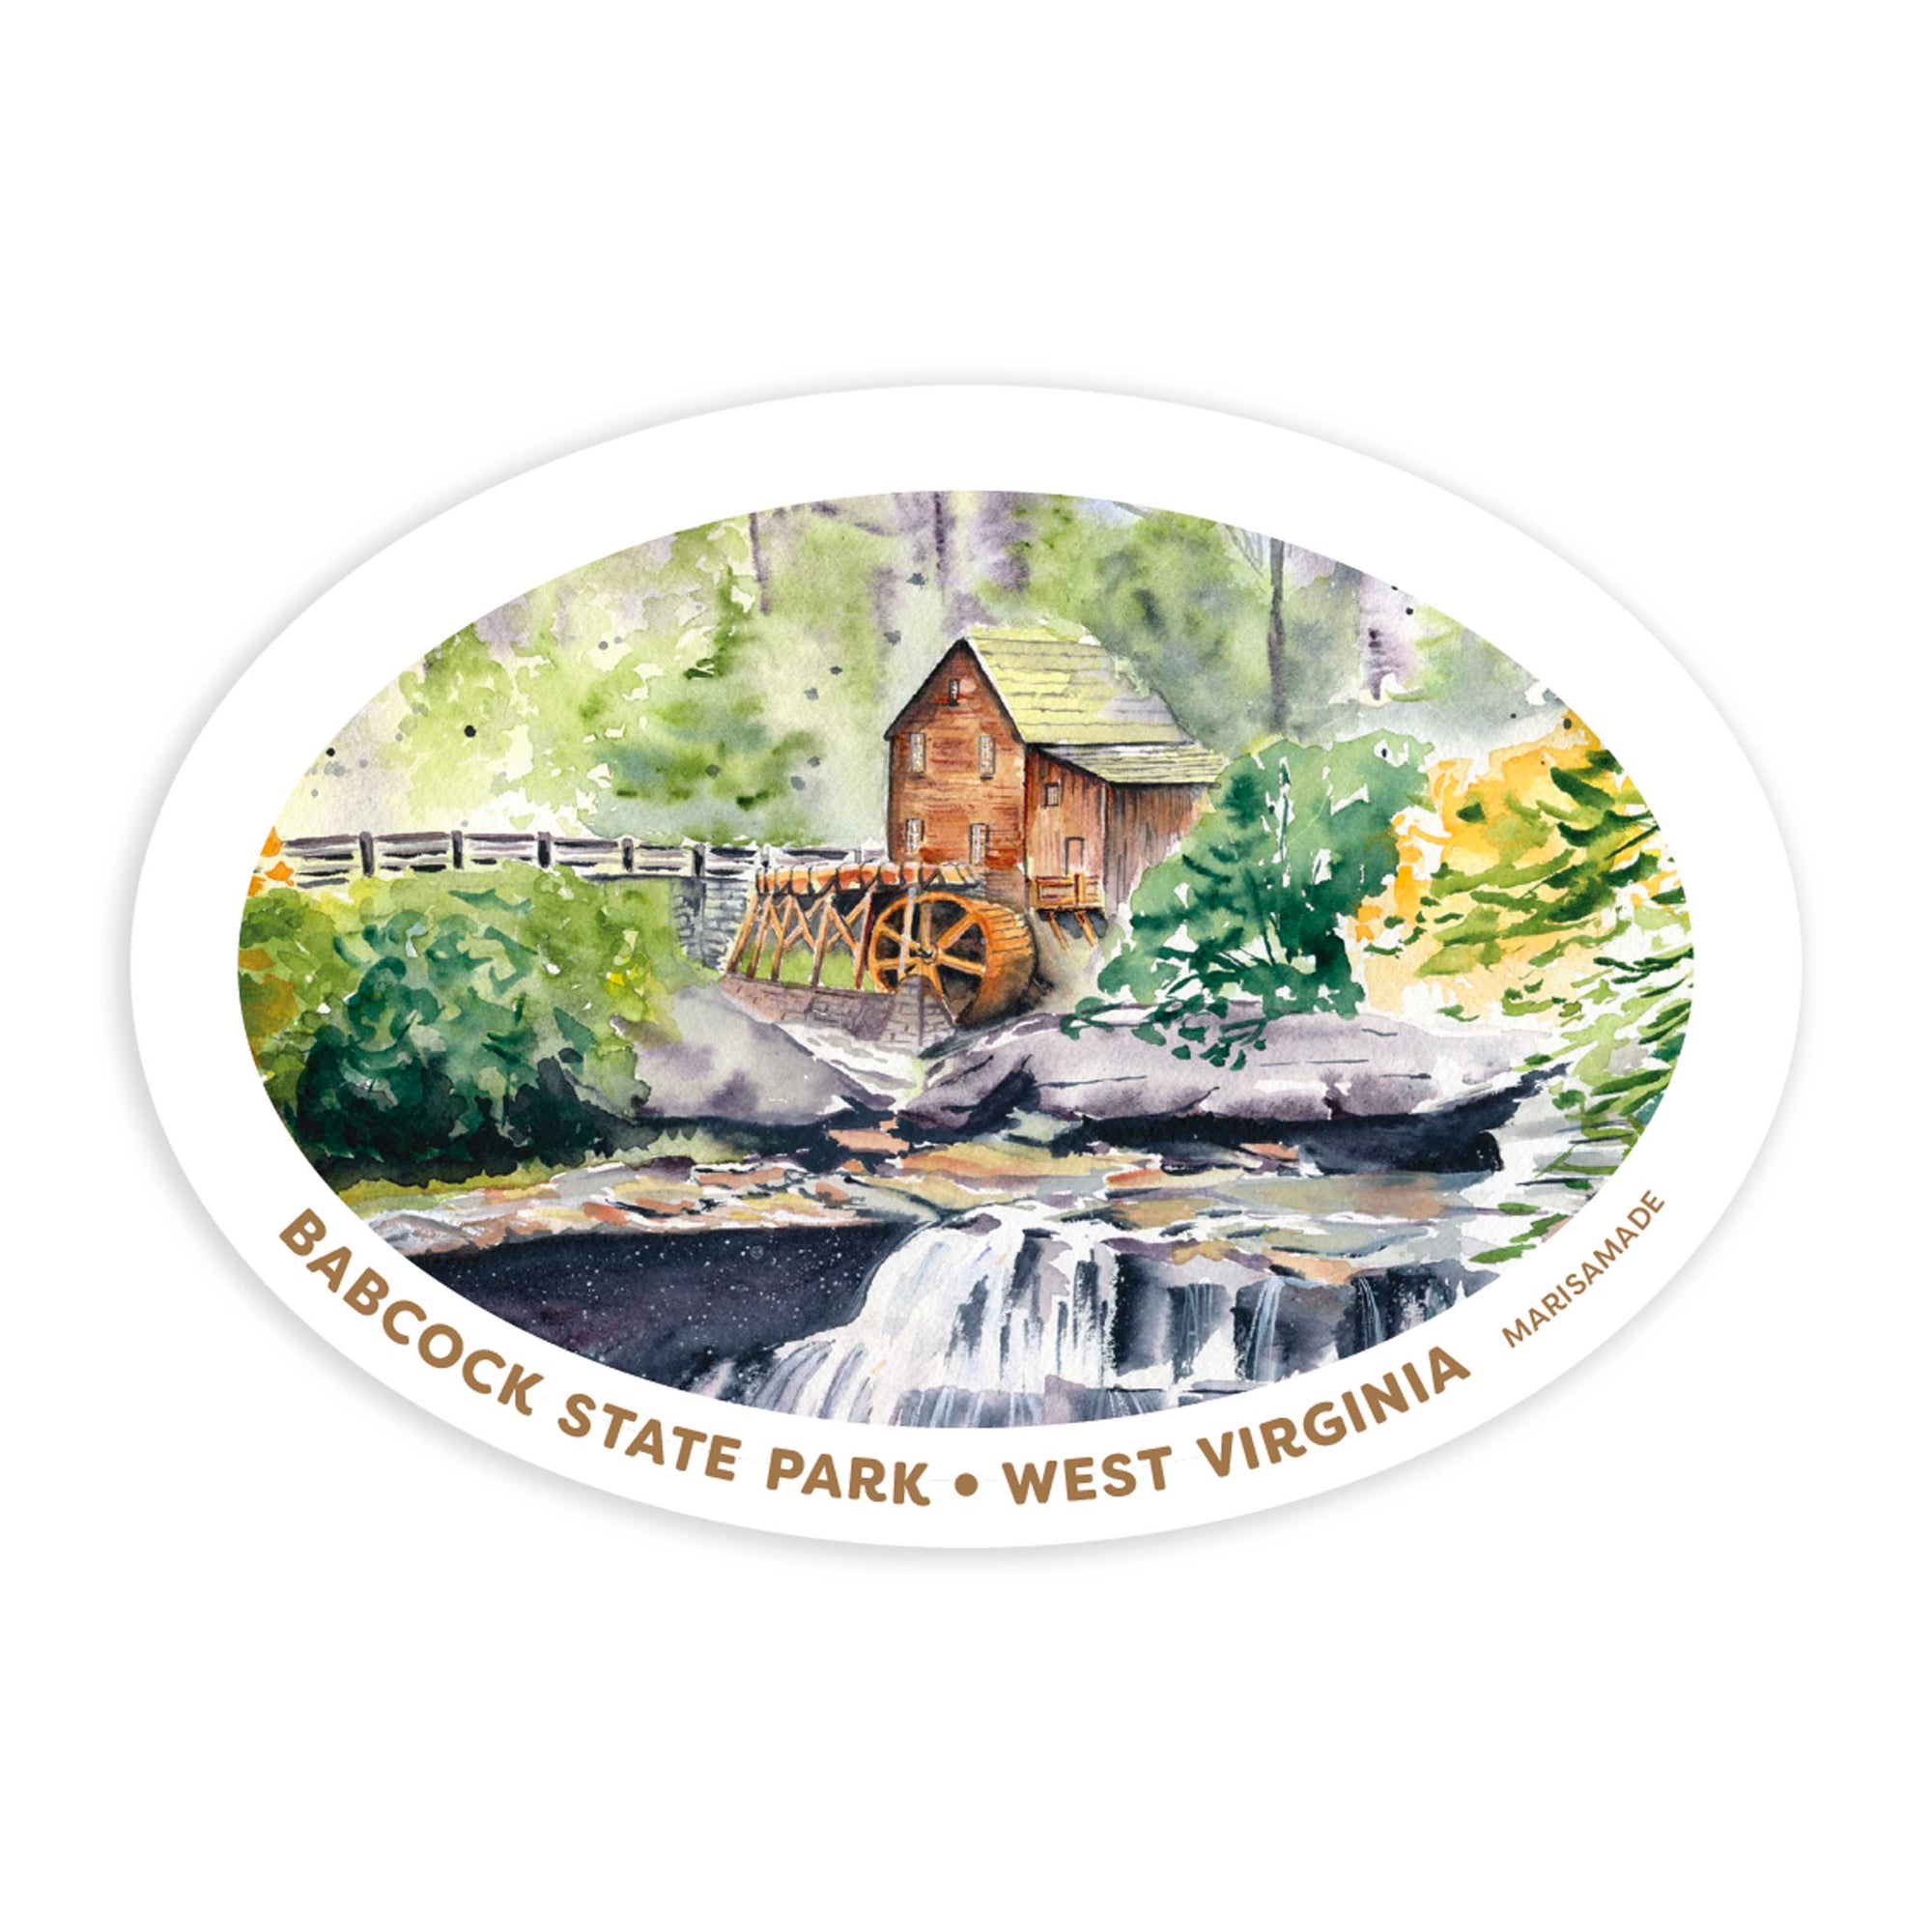 Babcock State Park Sticker